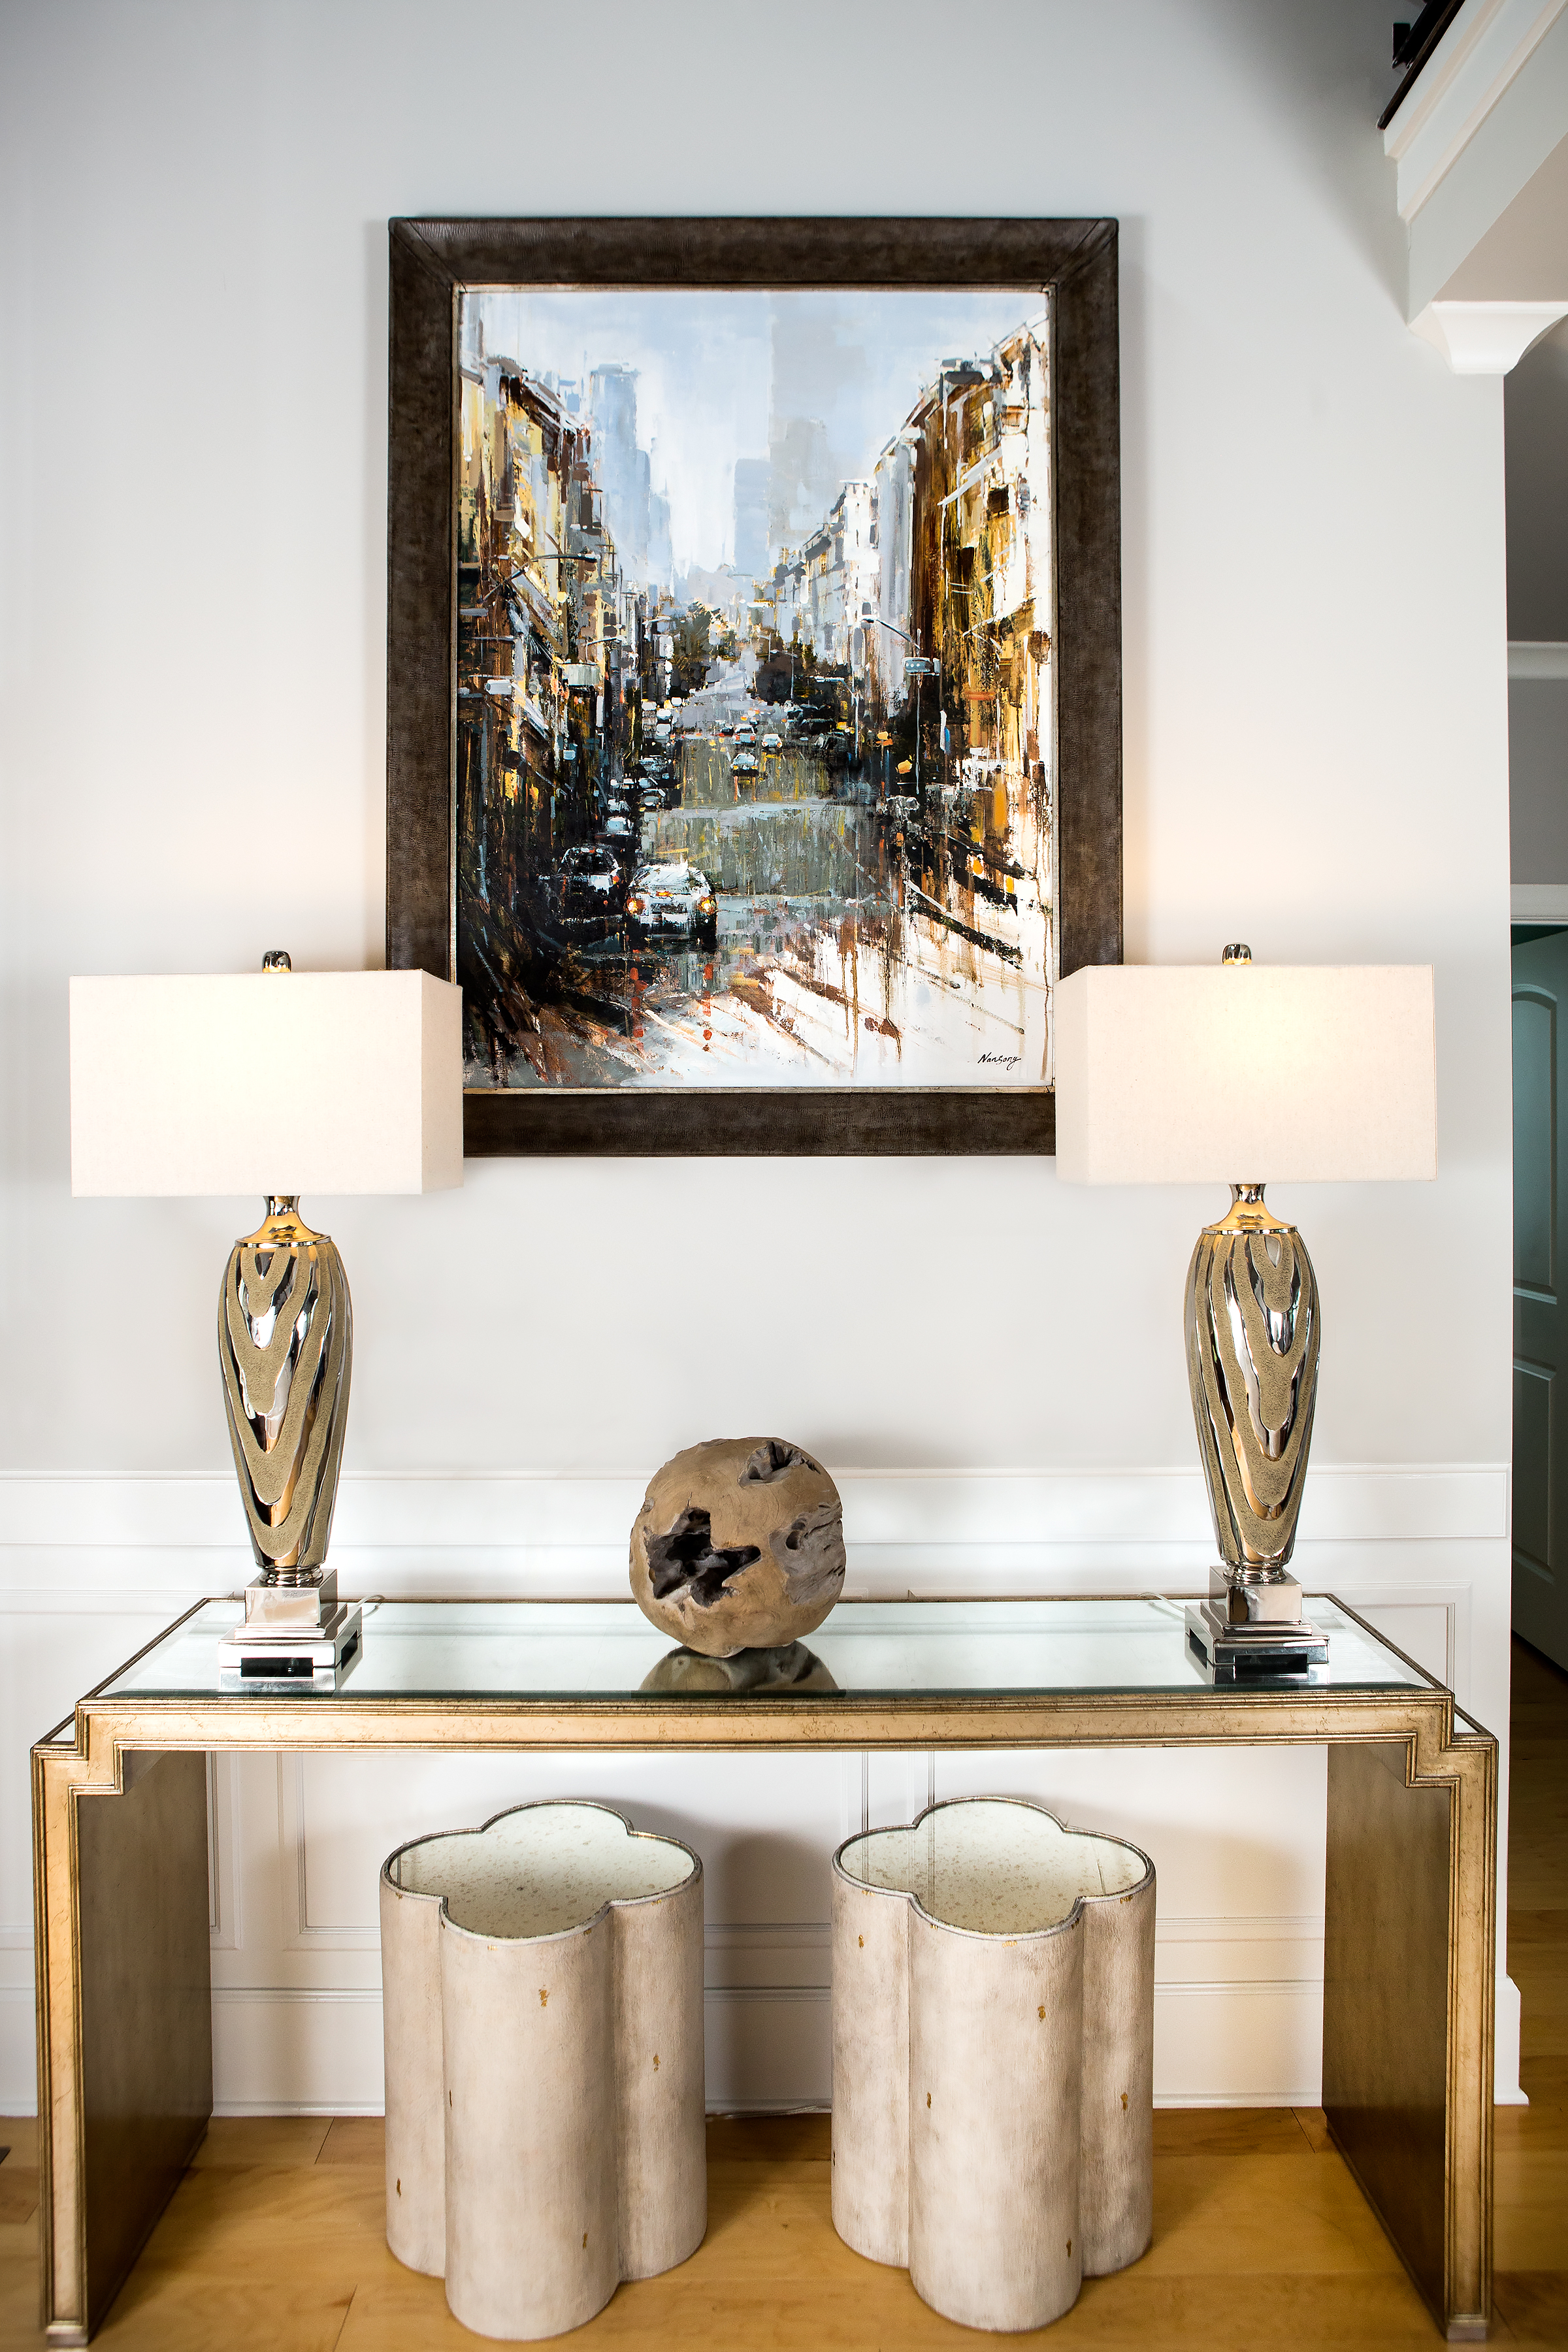  The handsome entrance hall is painted Repose Gray by Sherwin Williams. An avid art collector, Paul purchased the painting of San Francisco by artist NanSong from House of Frames. 